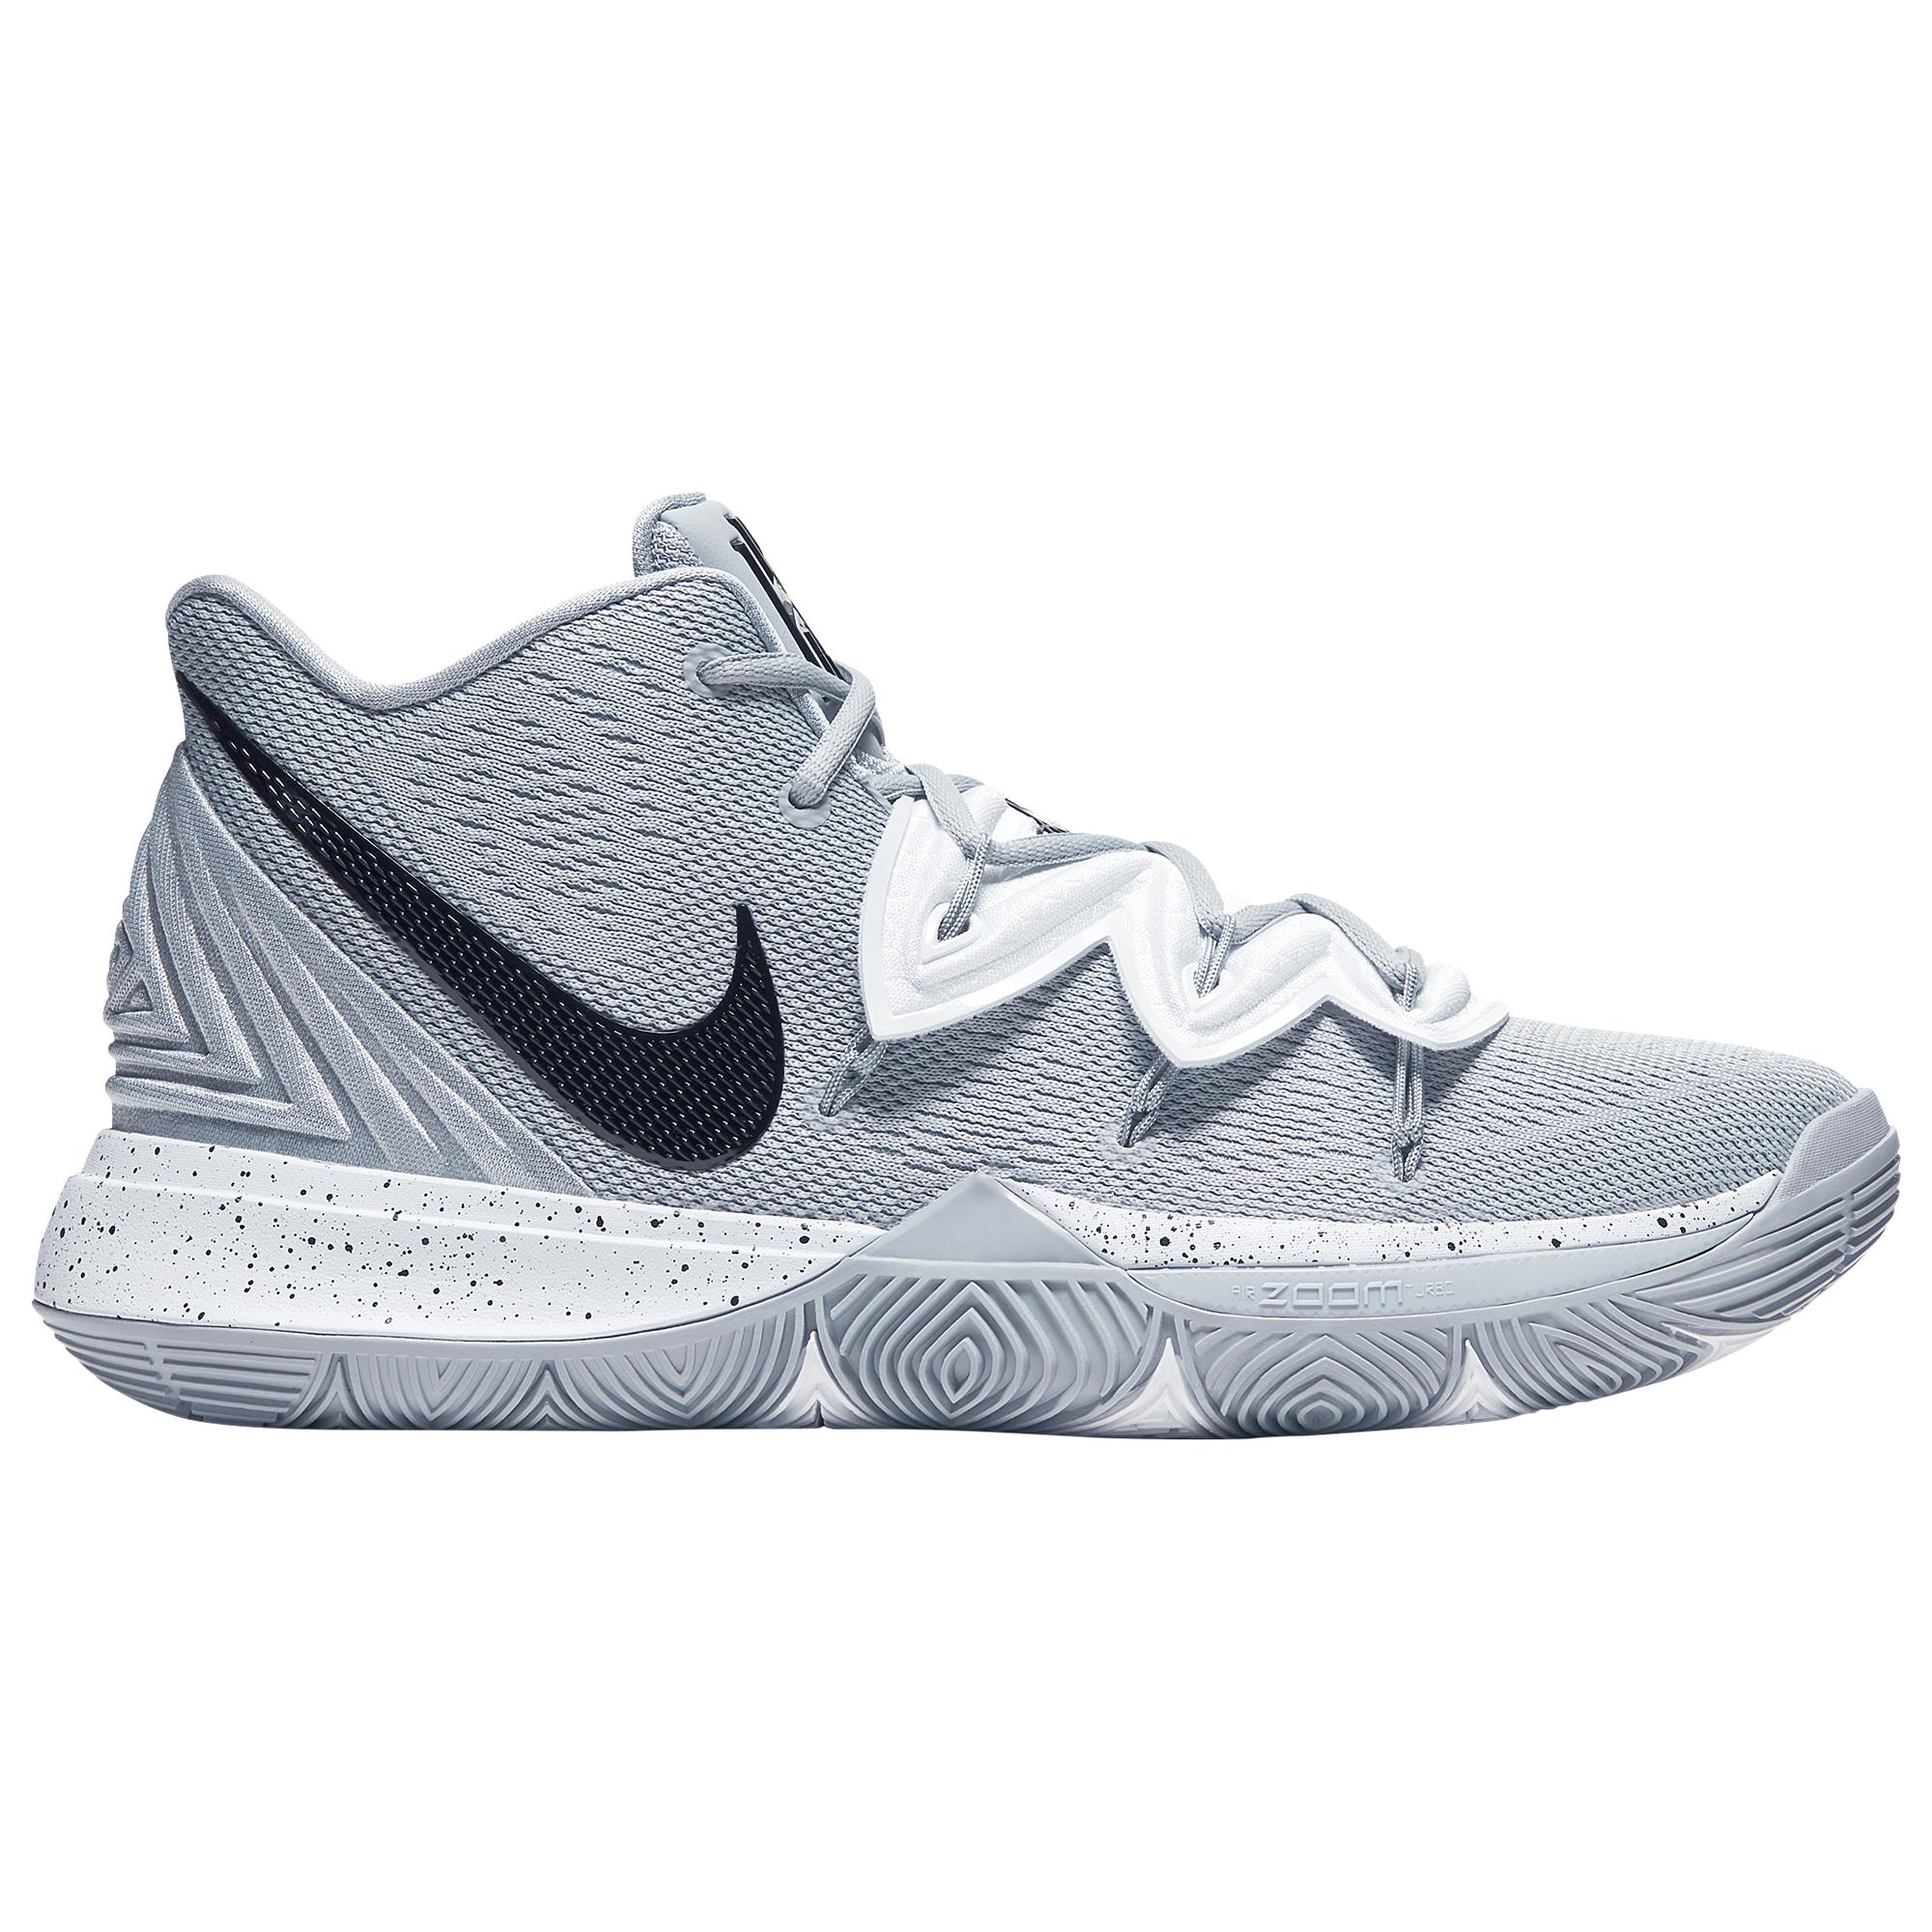 Nike Rubber Kyrie 5 Basketball Shoes in Grey/Black (Gray) for Men - Lyst